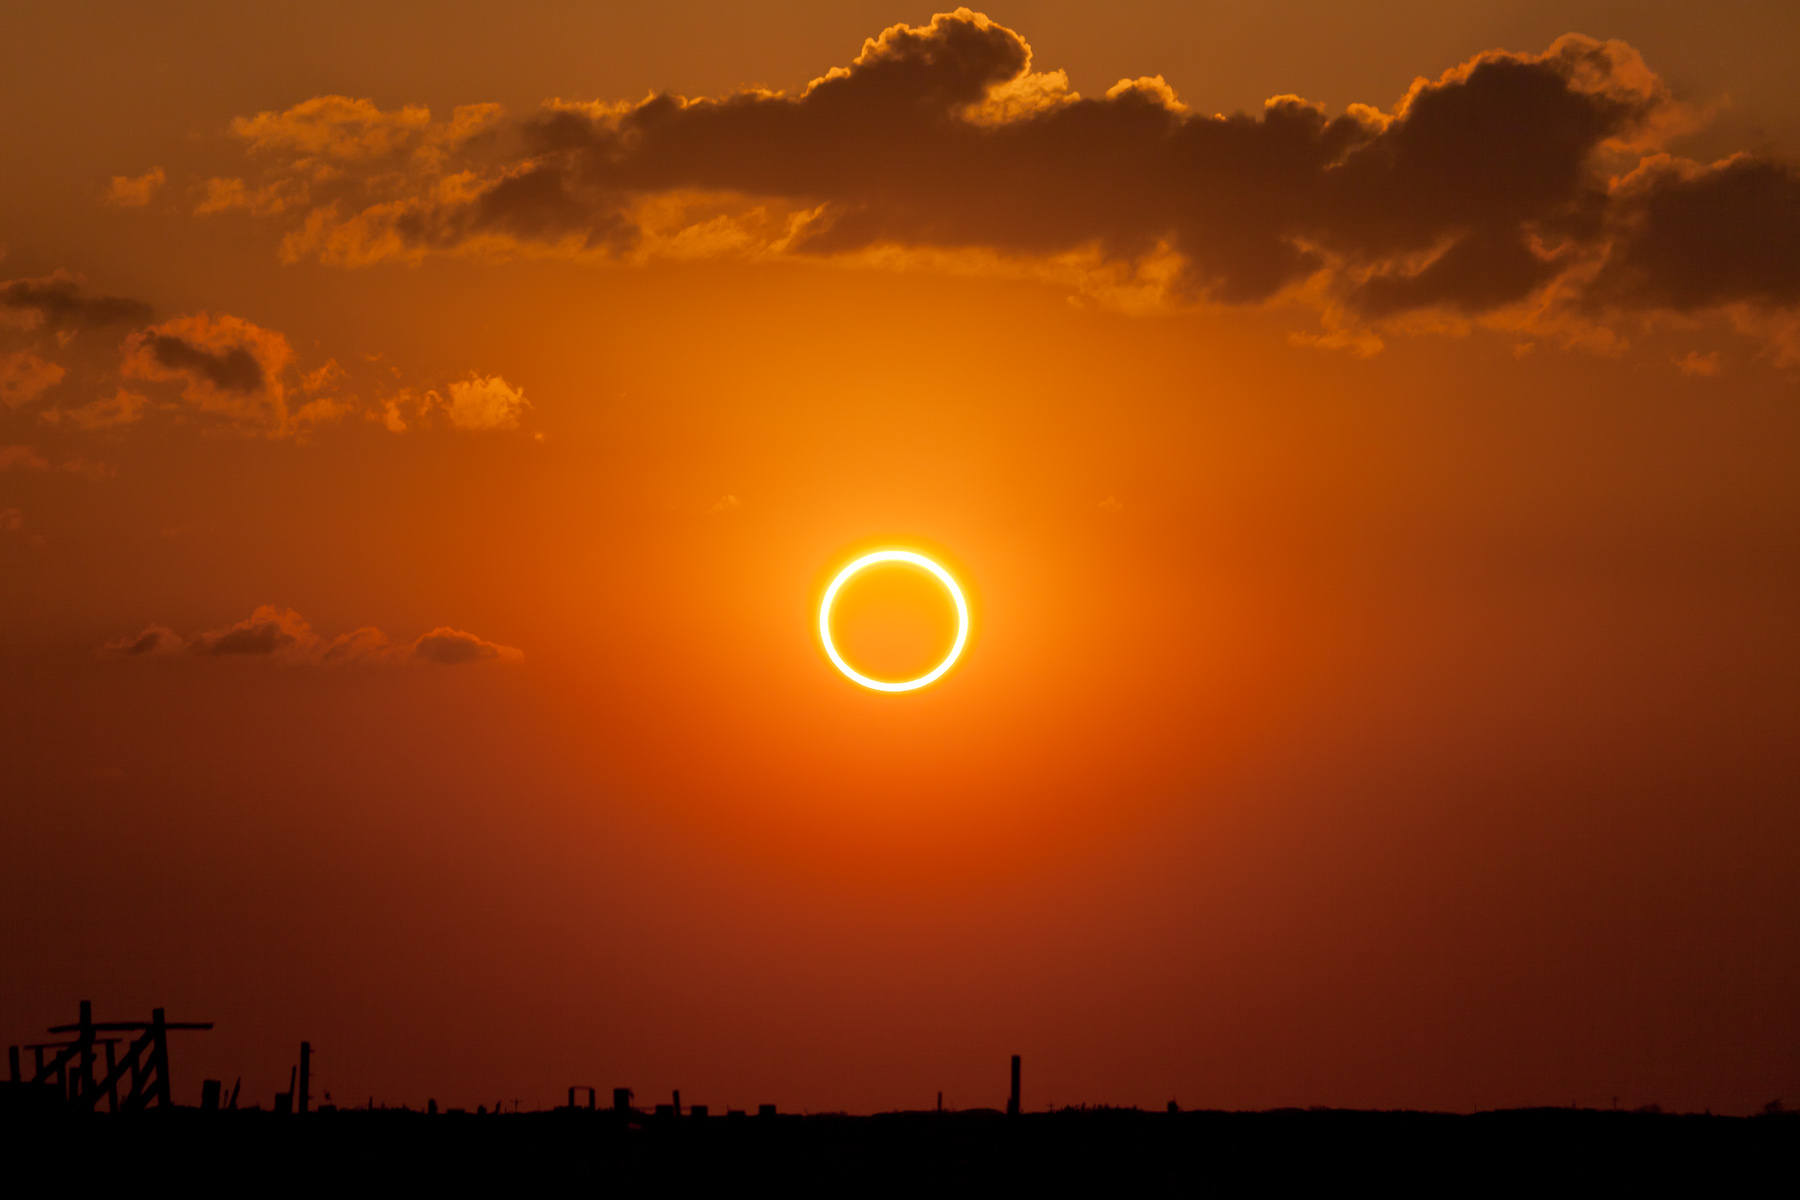 A solar eclipse with a ring in the sky, perfect for eclipse enthusiasts seeking unique activities.